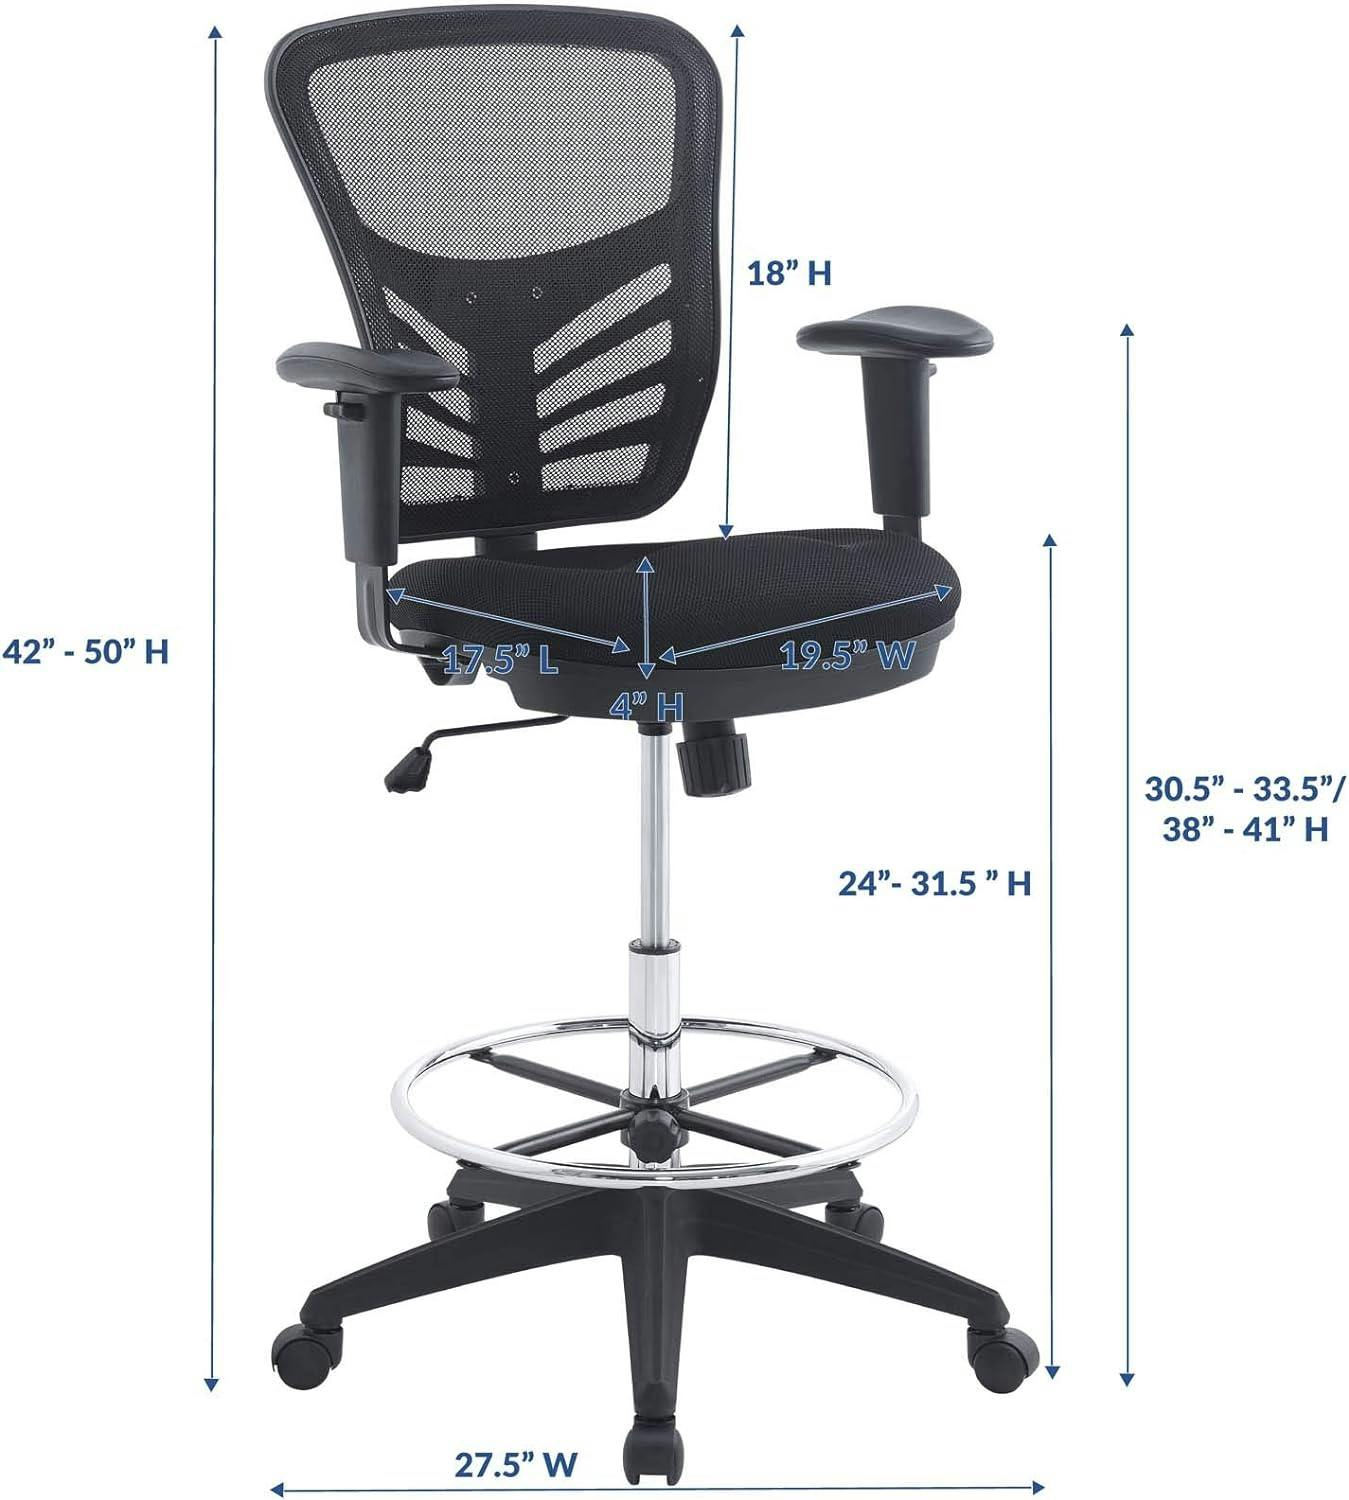 ErgoFlex Black Mesh Drafting Chair with Adjustable Arms & Chrome Footring